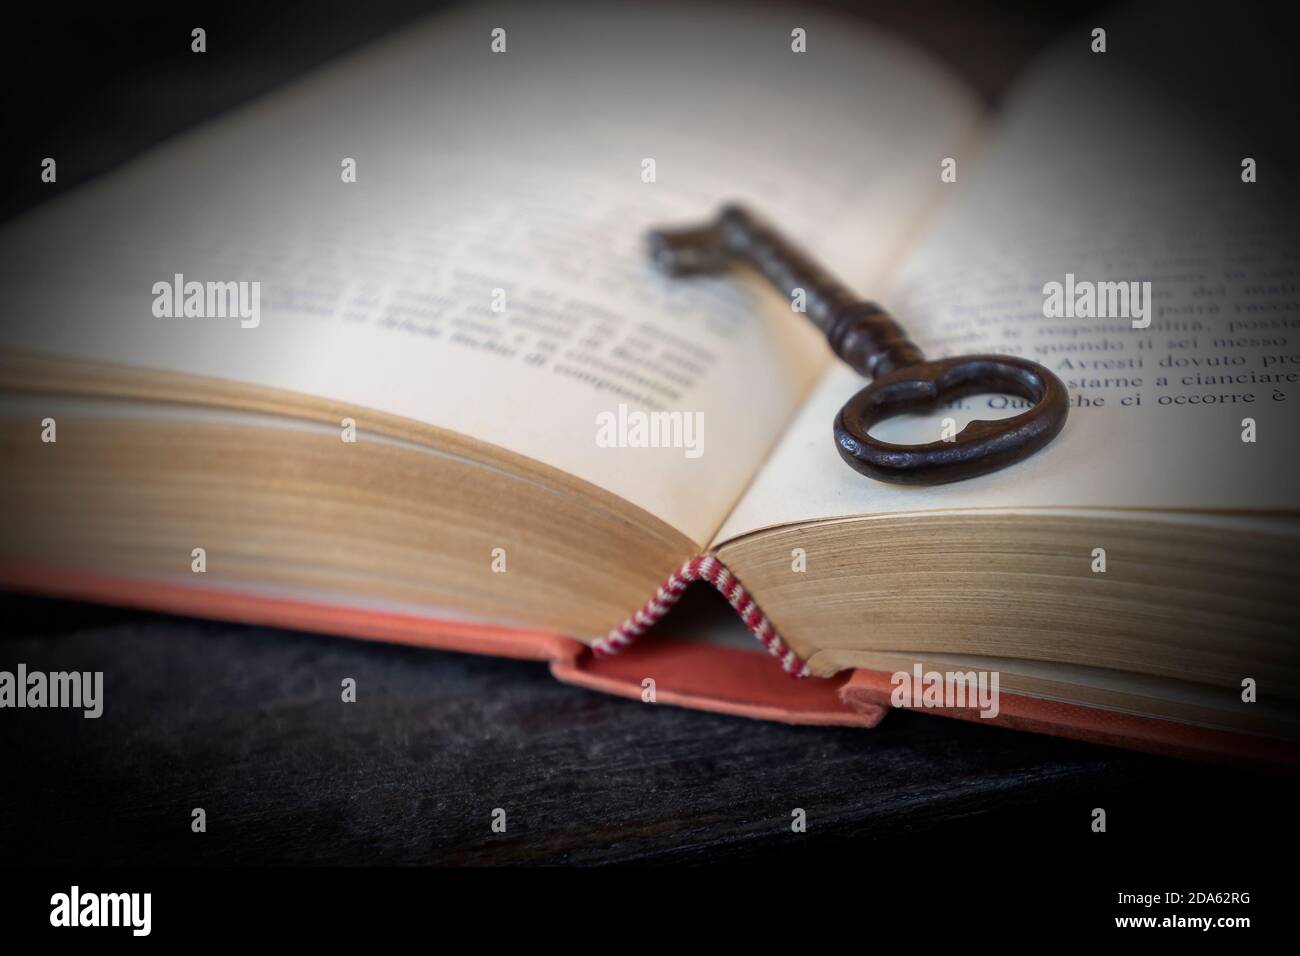 An old key is leaning inside an old book against a black background Stock Photo